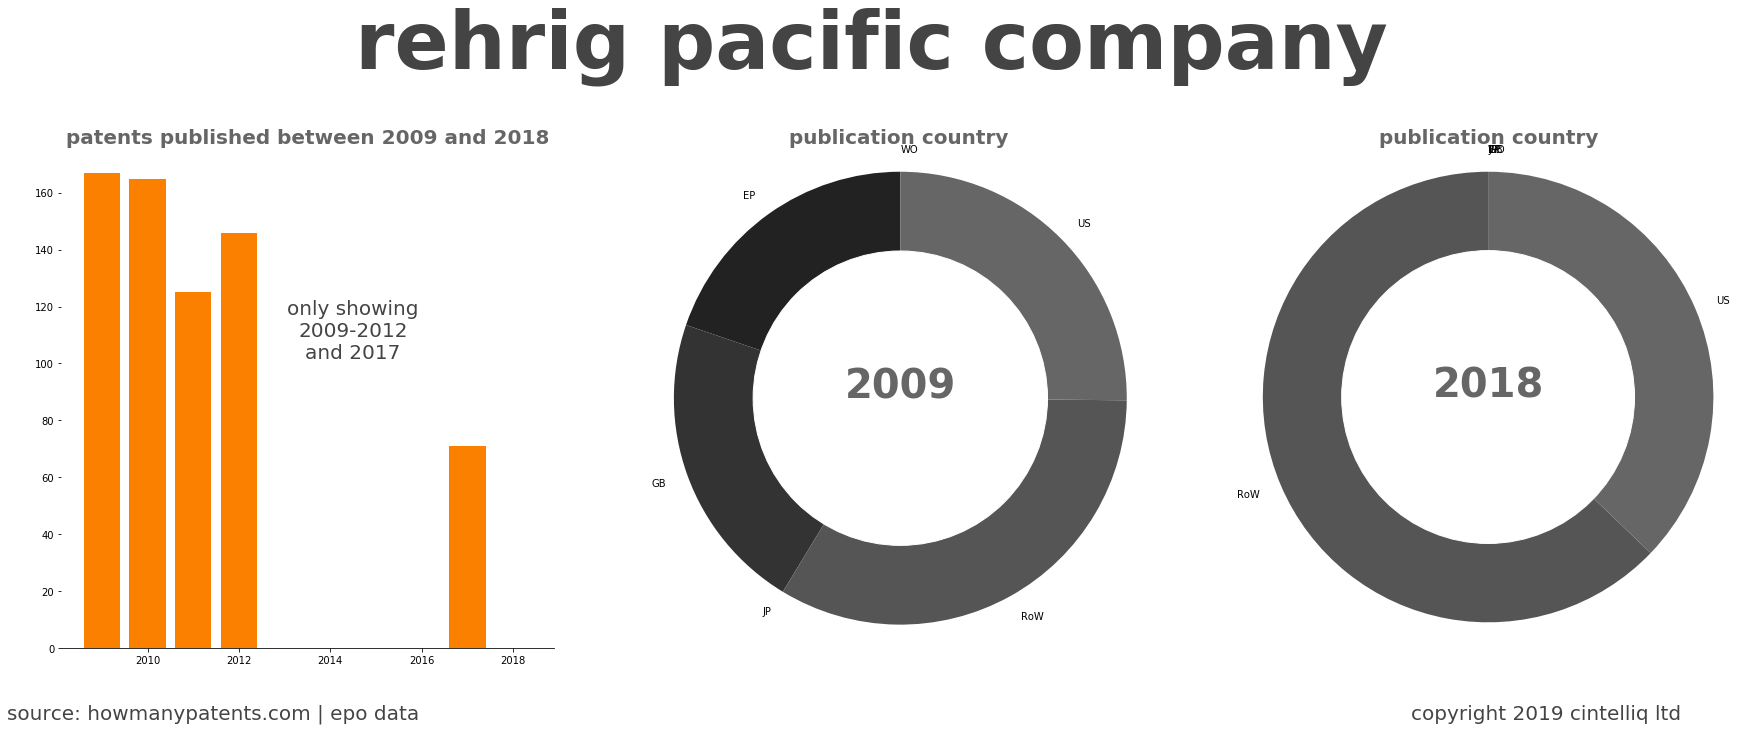 summary of patents for Rehrig Pacific Company